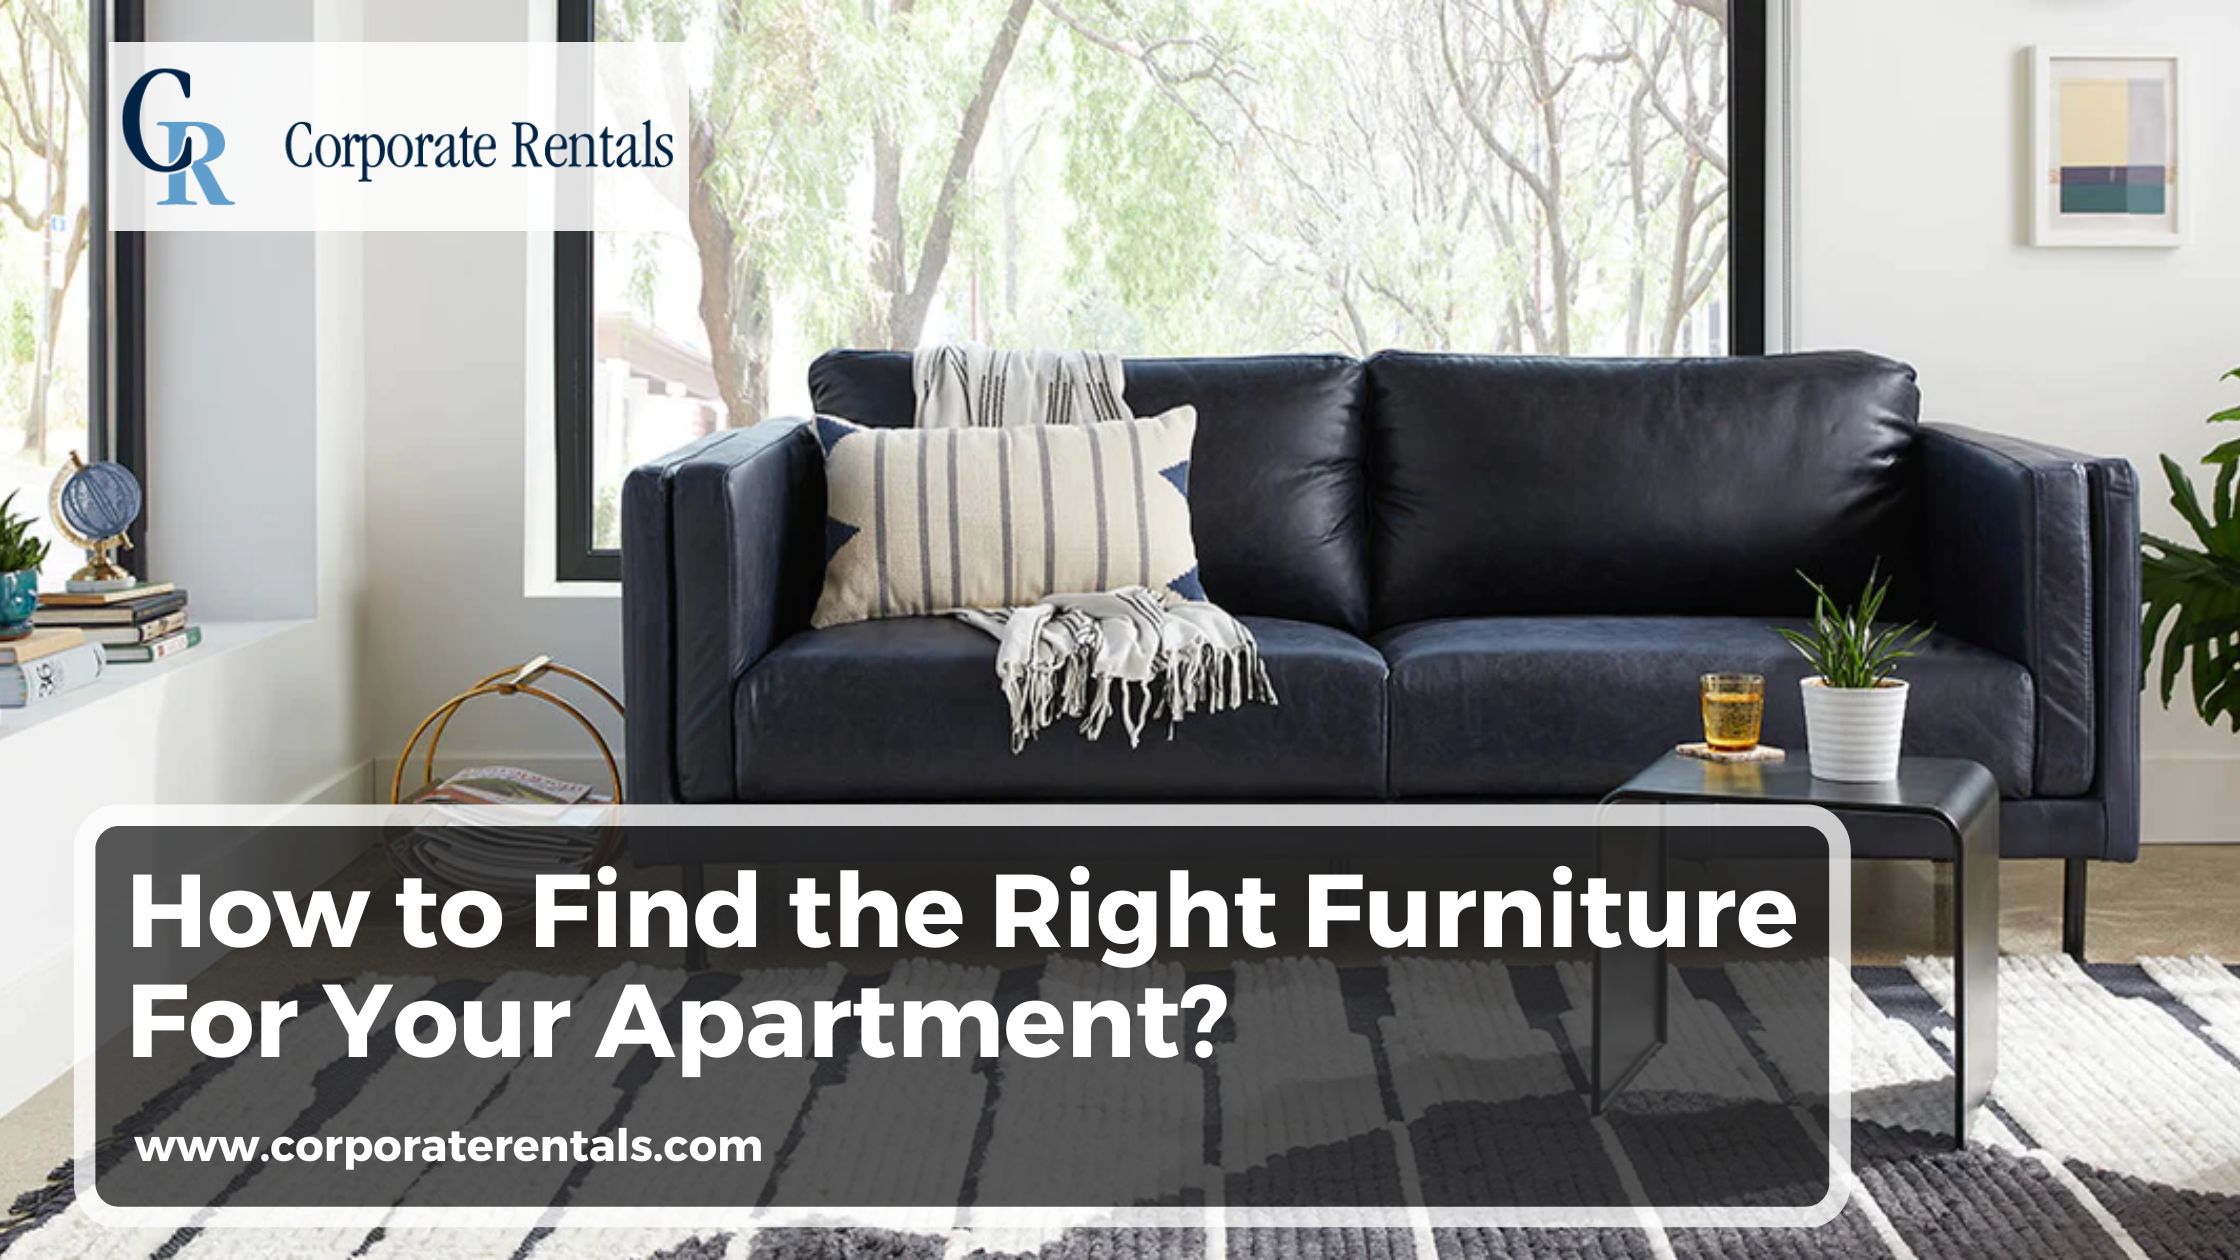 How to Find the Right Furniture for Your Apartment?